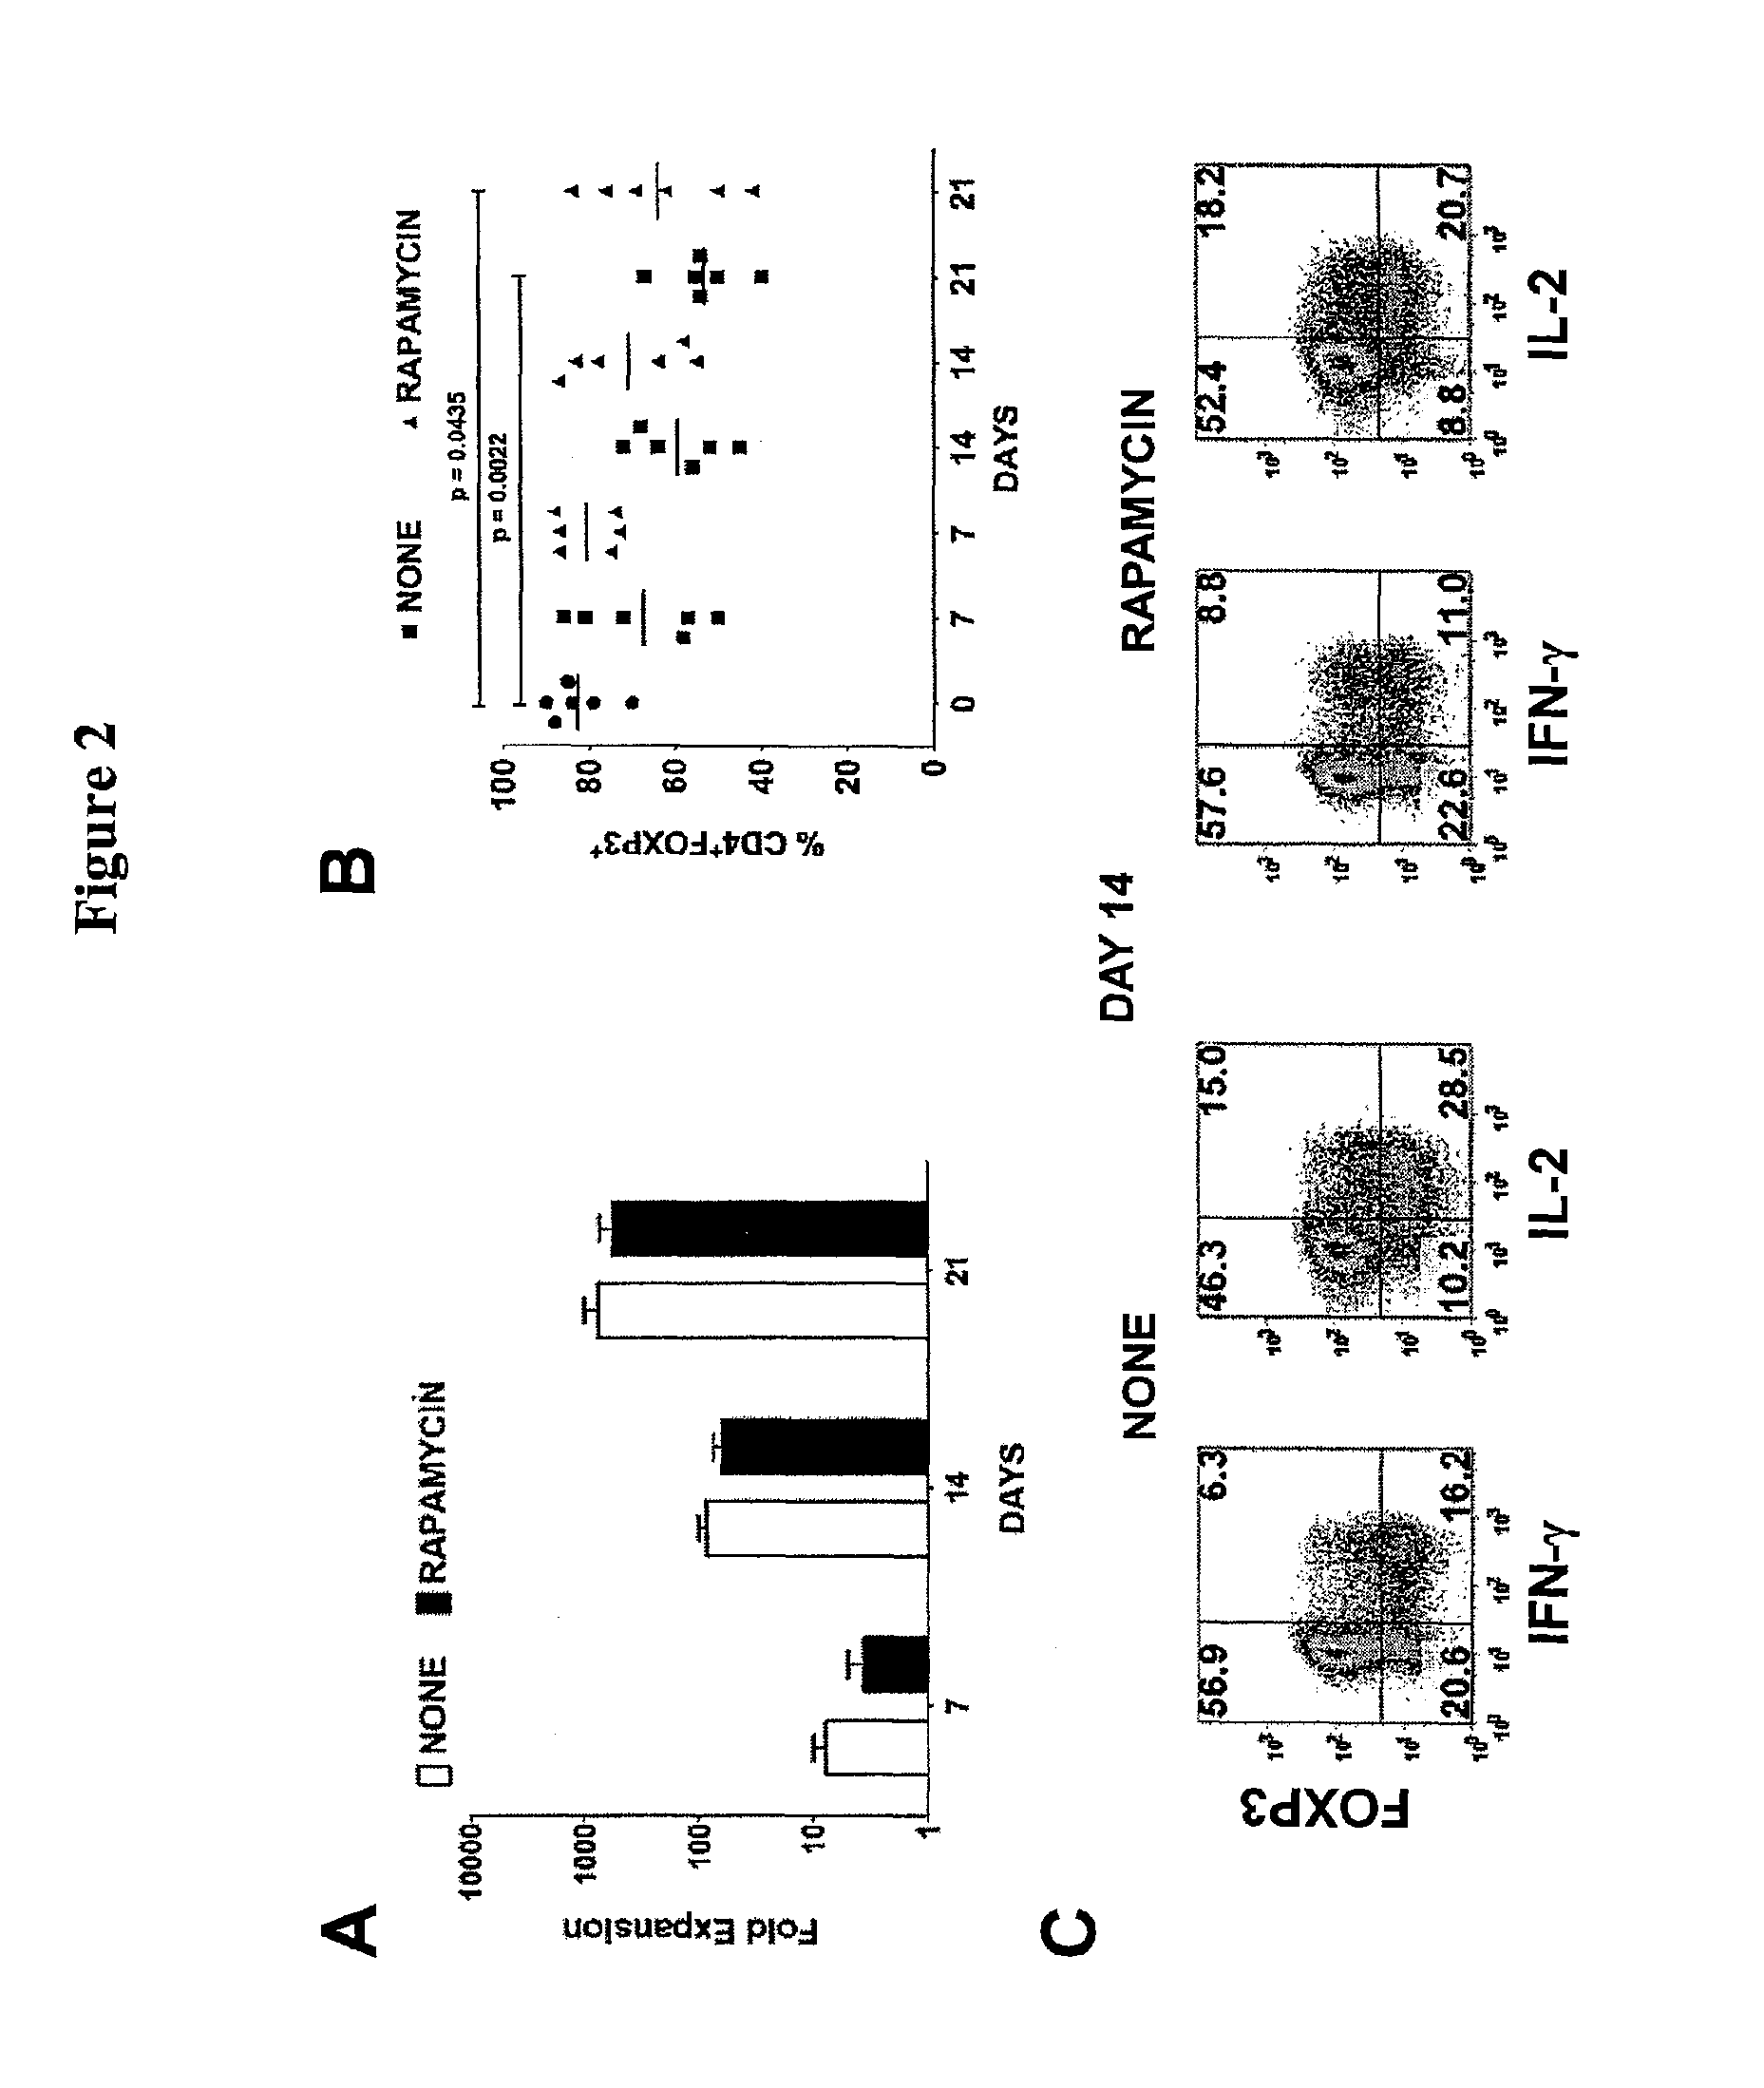 Method of making an isolated population of FOXP3+ regulatory T cells